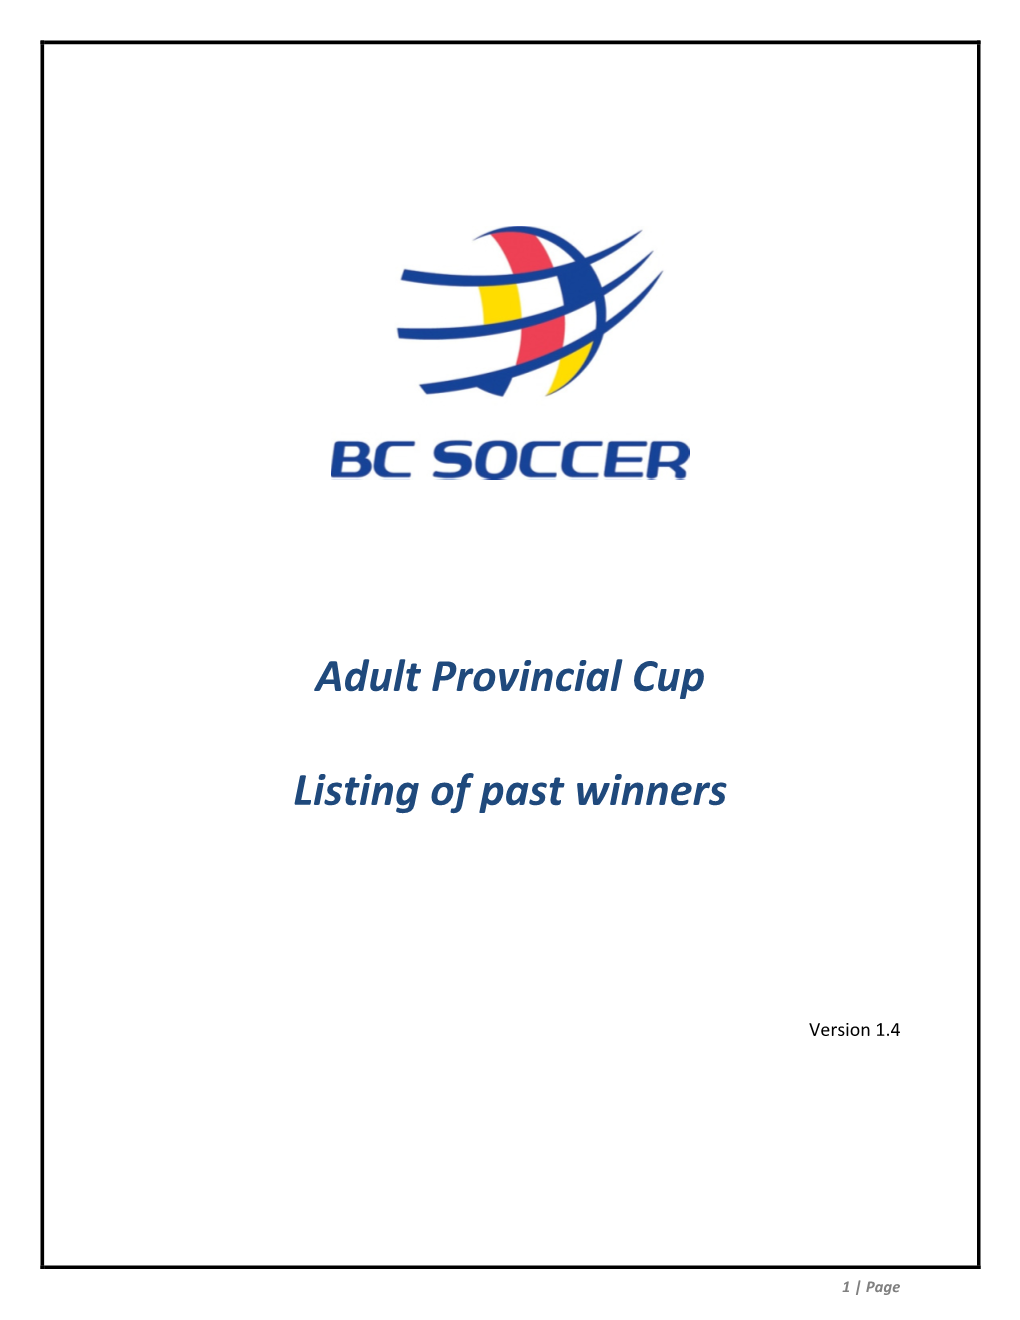 Adult Provincial Cup Listing of Past Winners